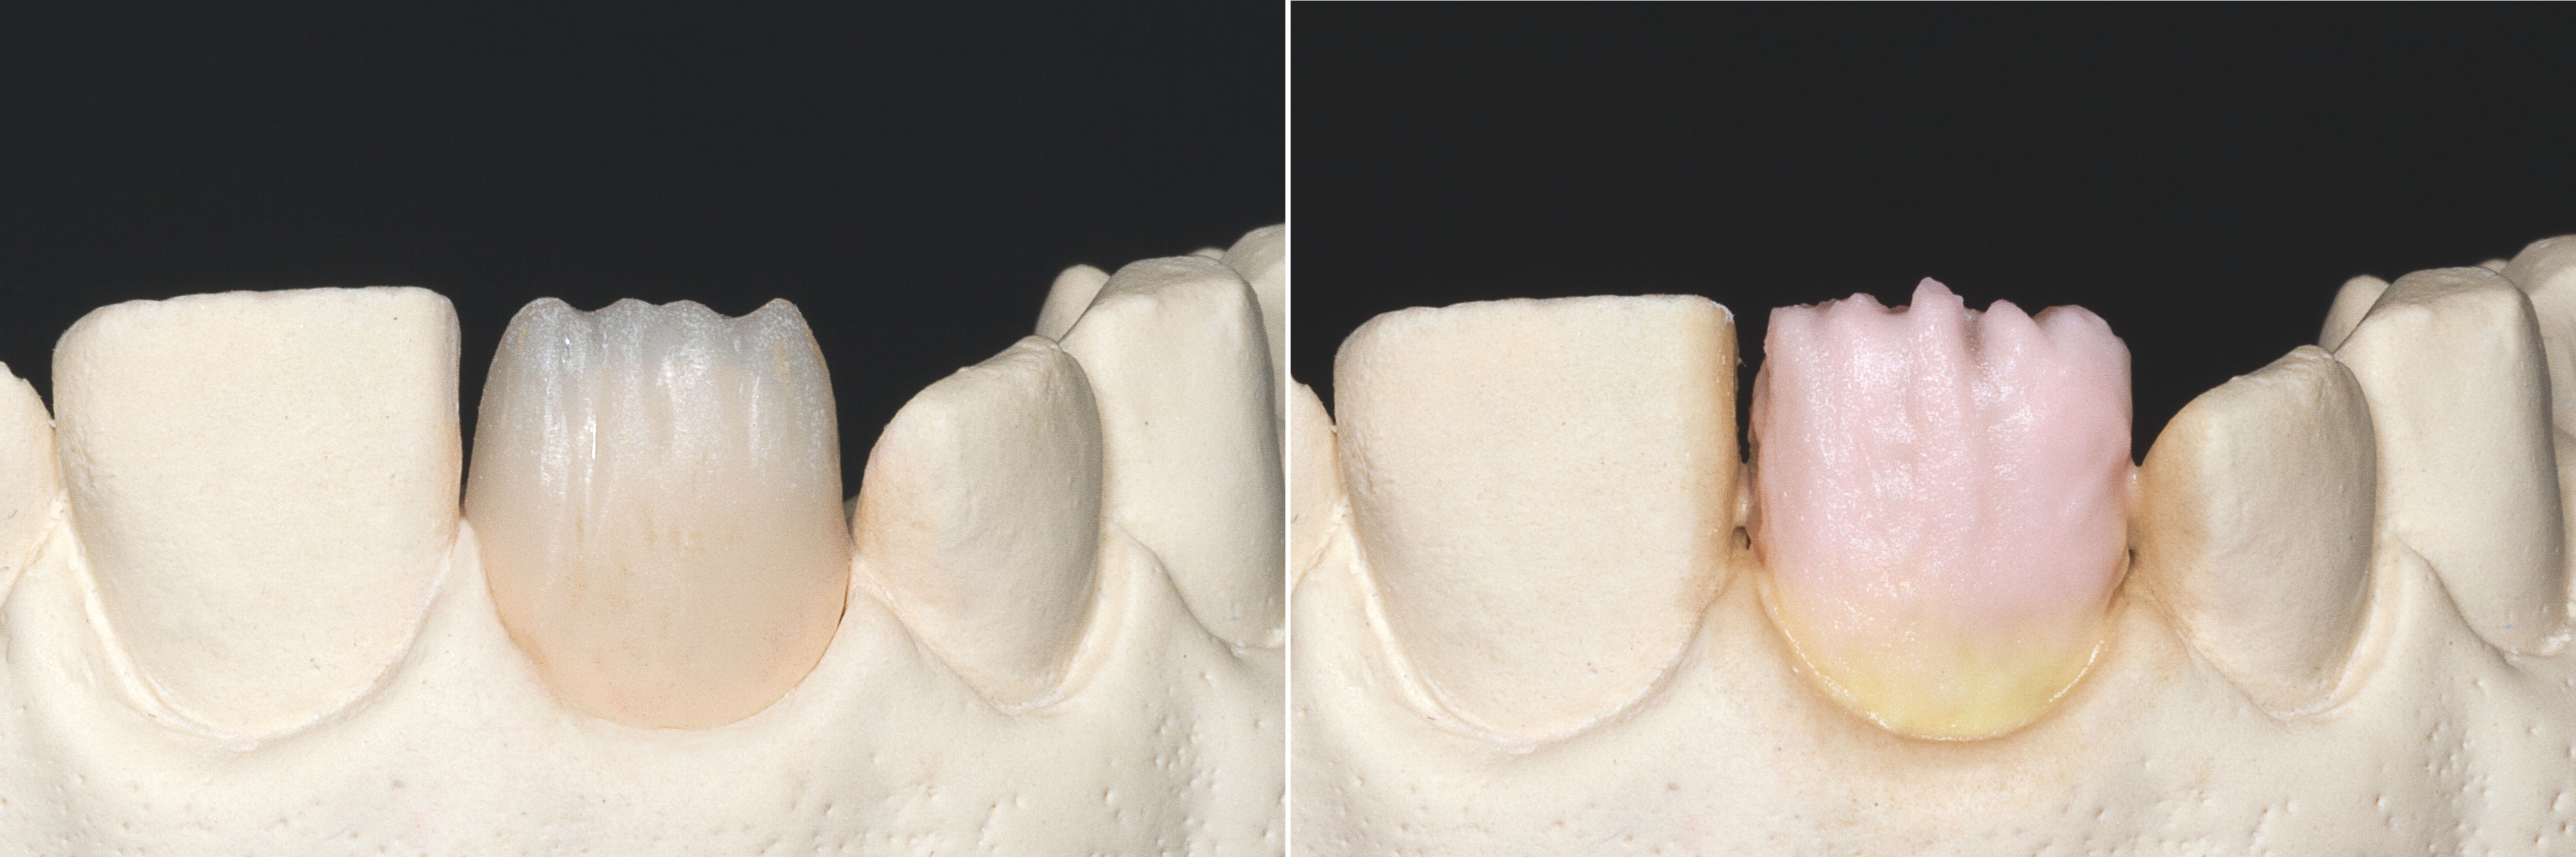 Fig. 1: Incisally reduced crowns.
Fig. 2: Completion of the tooth shape: in the cervical region with VITA VM 11 SUN DENTINE and in the body with VITA VM 11 TRANSPA DENTINE in the correct tooth shade.